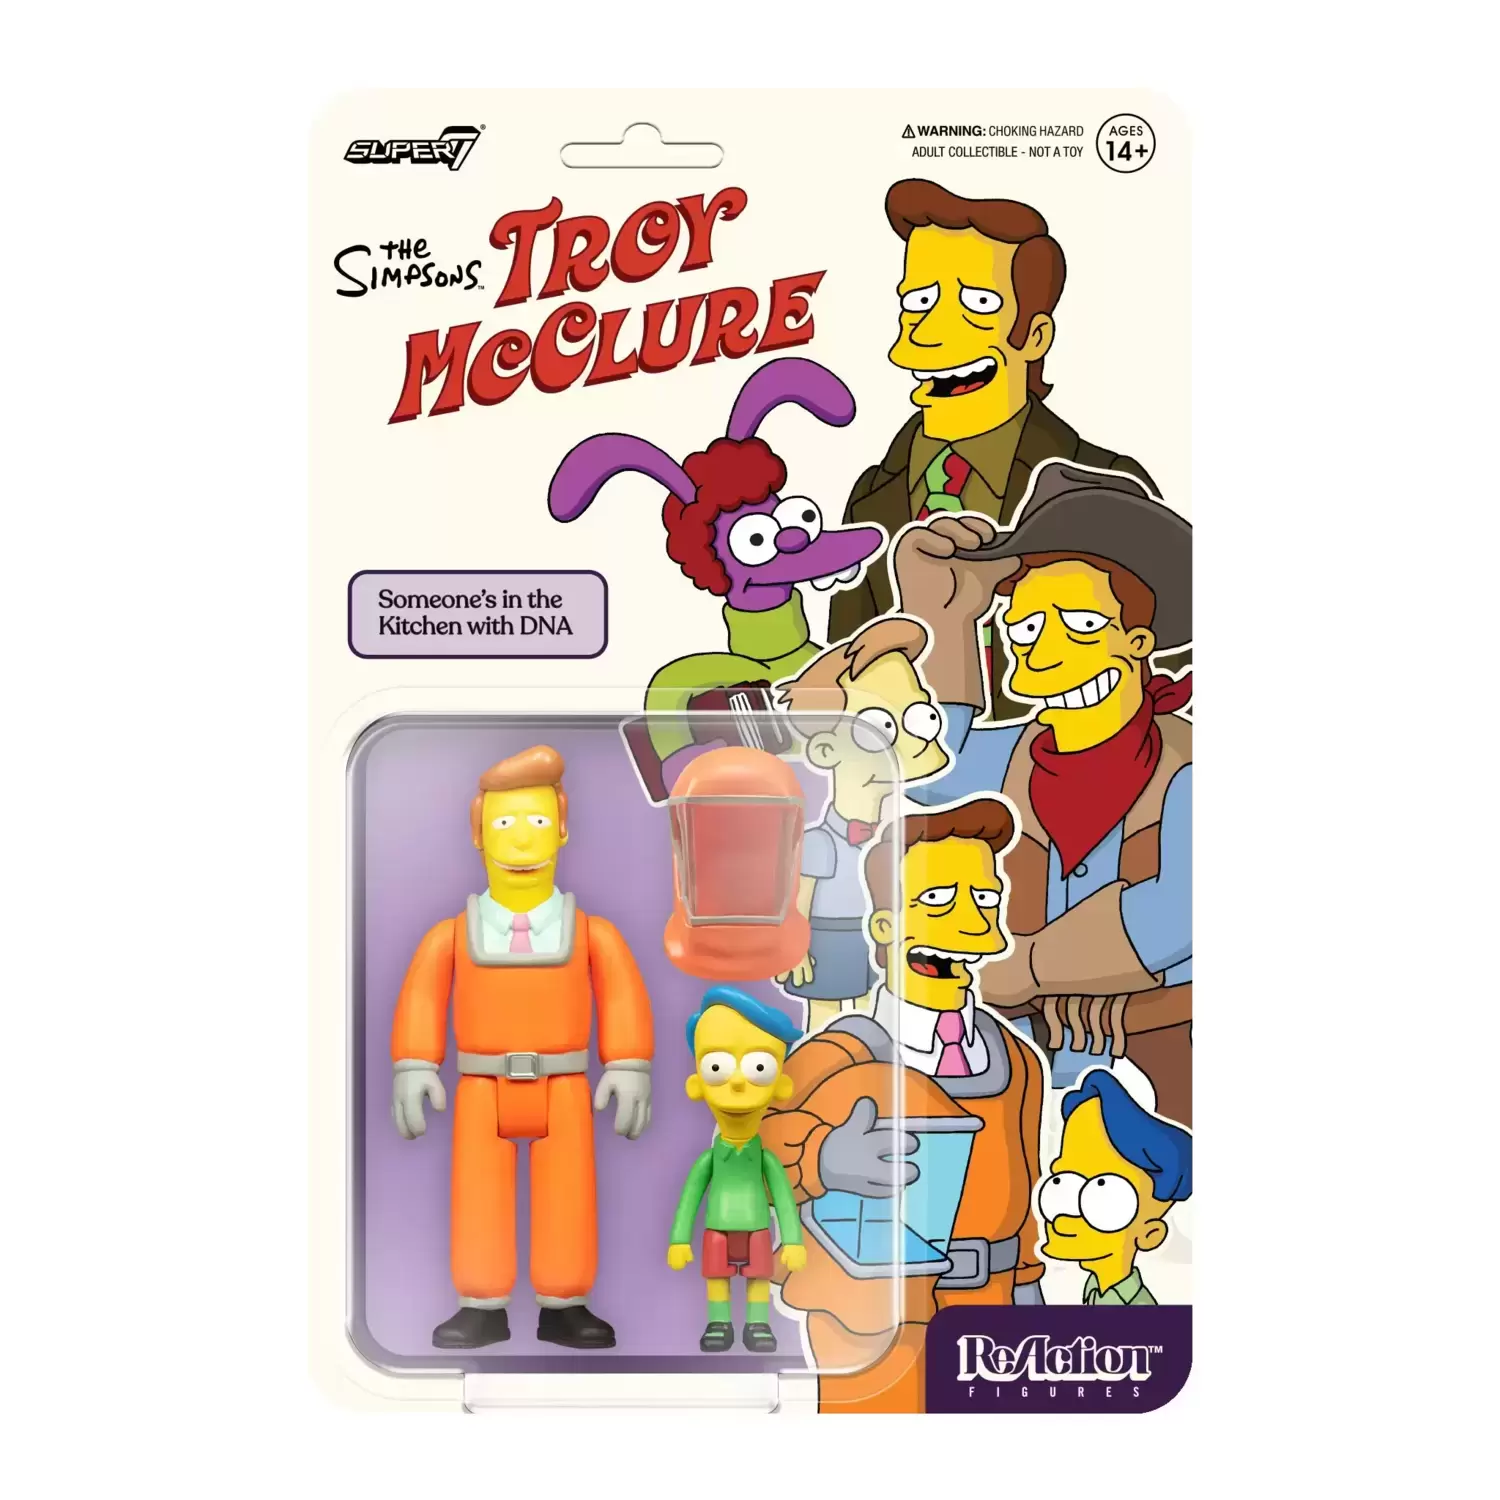 ReAction Figures - The Simpsons Troy McClure - Someone’s in the Kitchen with DNA